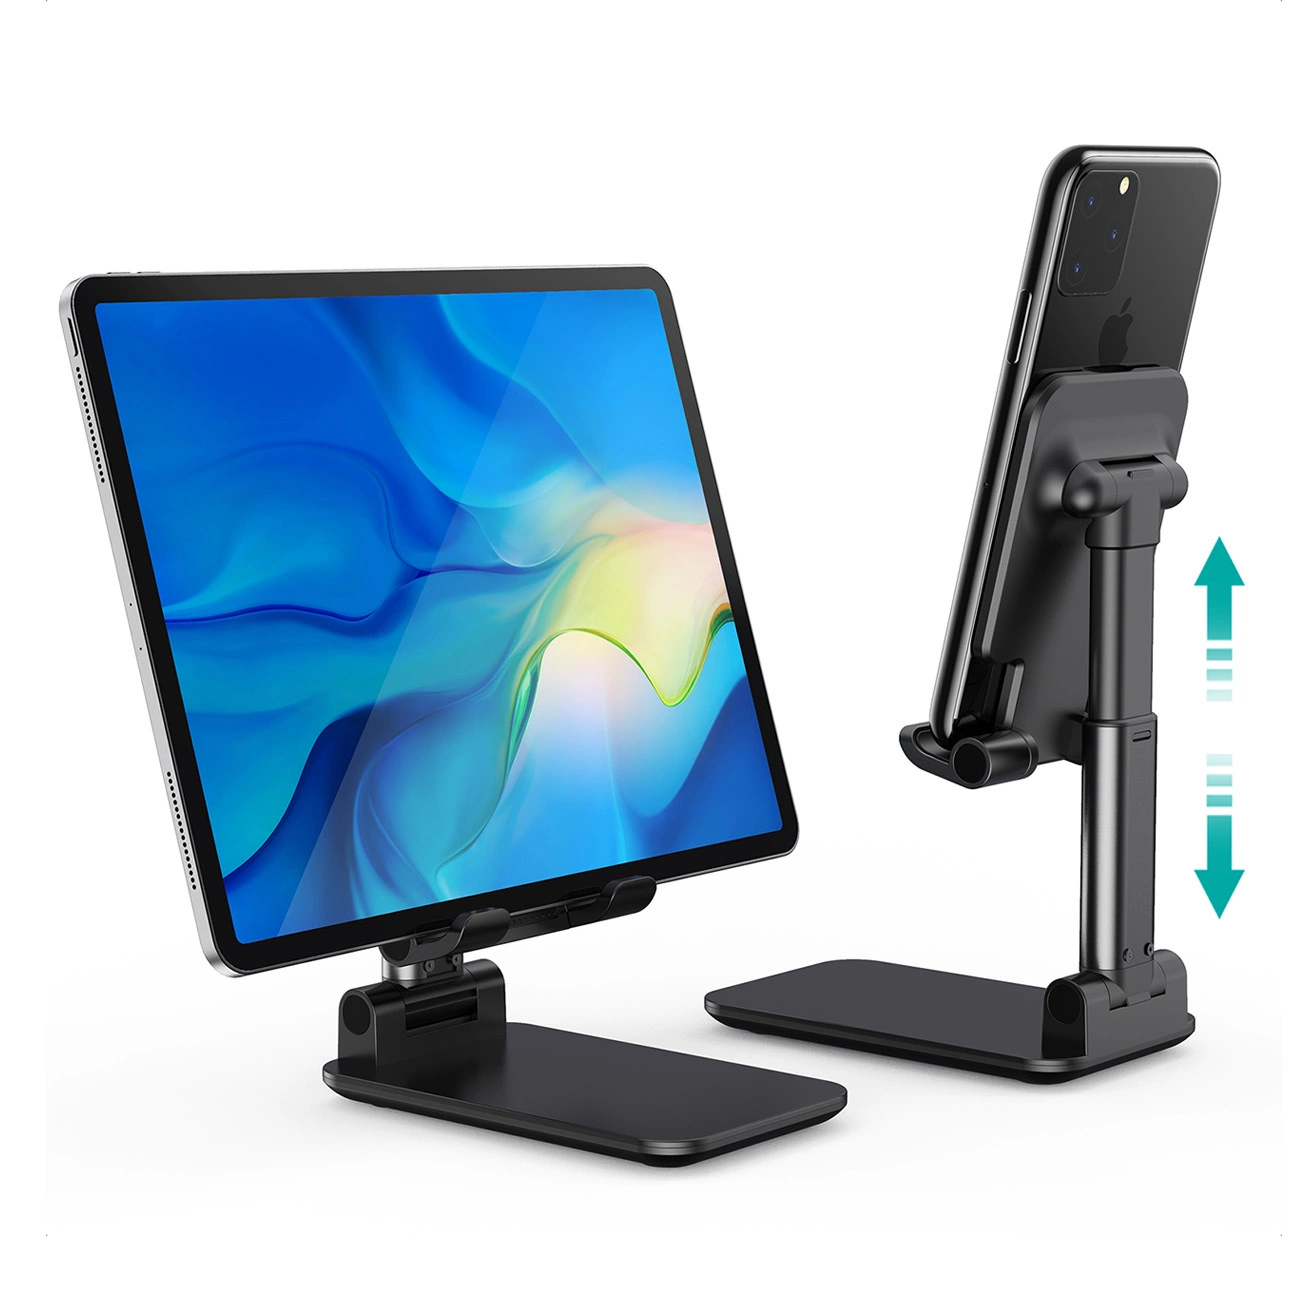 Choetech H88-BK foldable stand for a phone or tablet on a white background